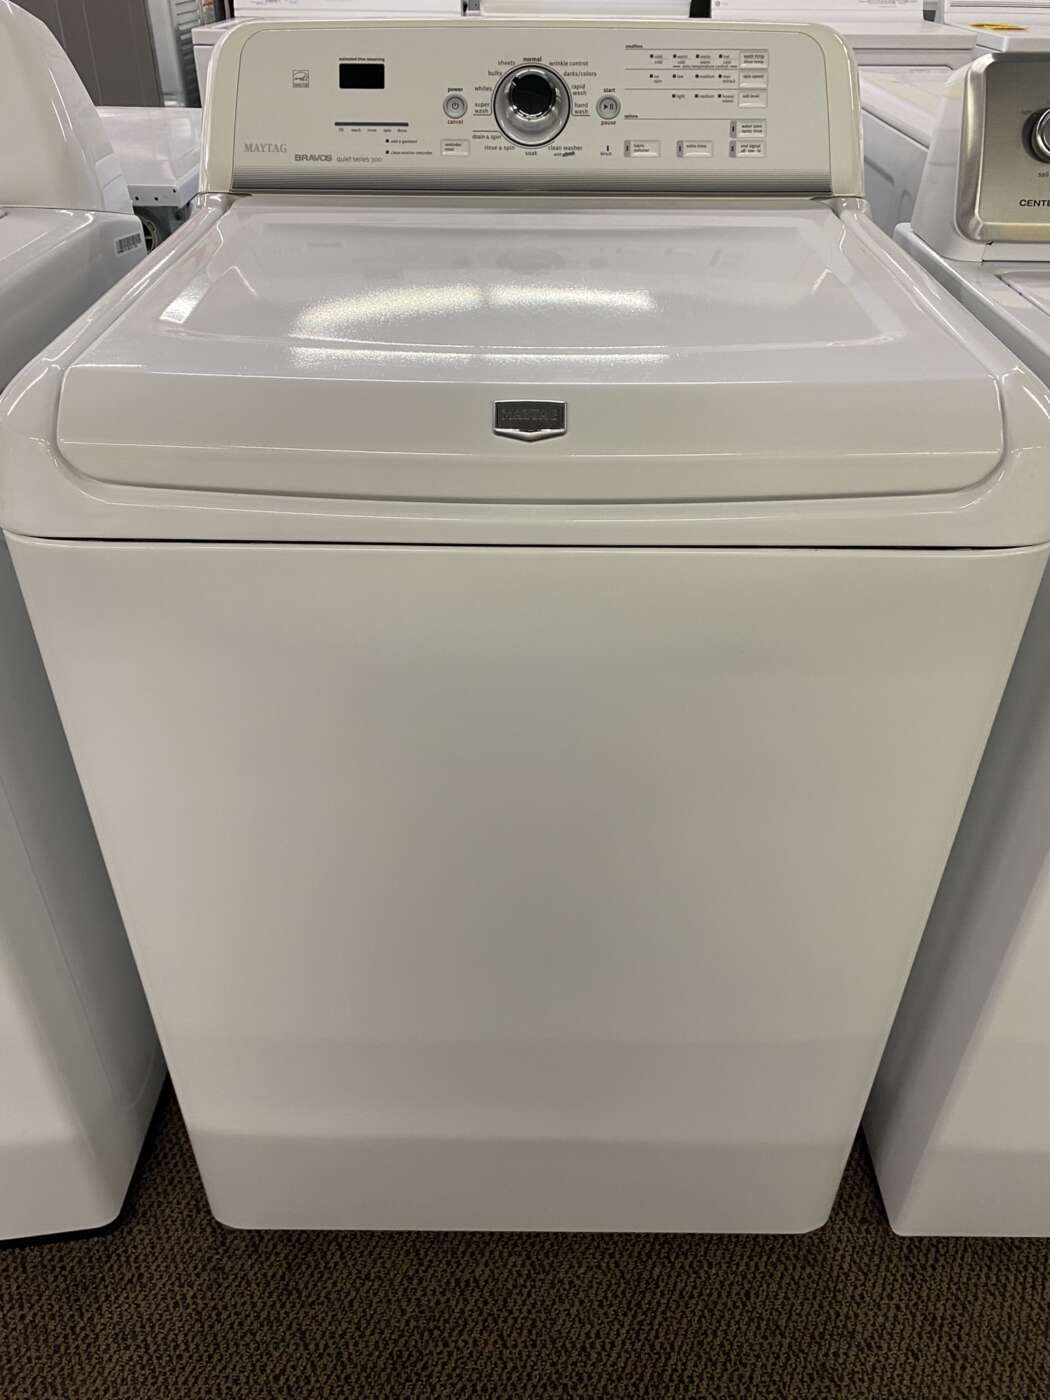 Reconditioned MAYTAG 4.7 Cu. Ft. Top-Load H/E Washer – White